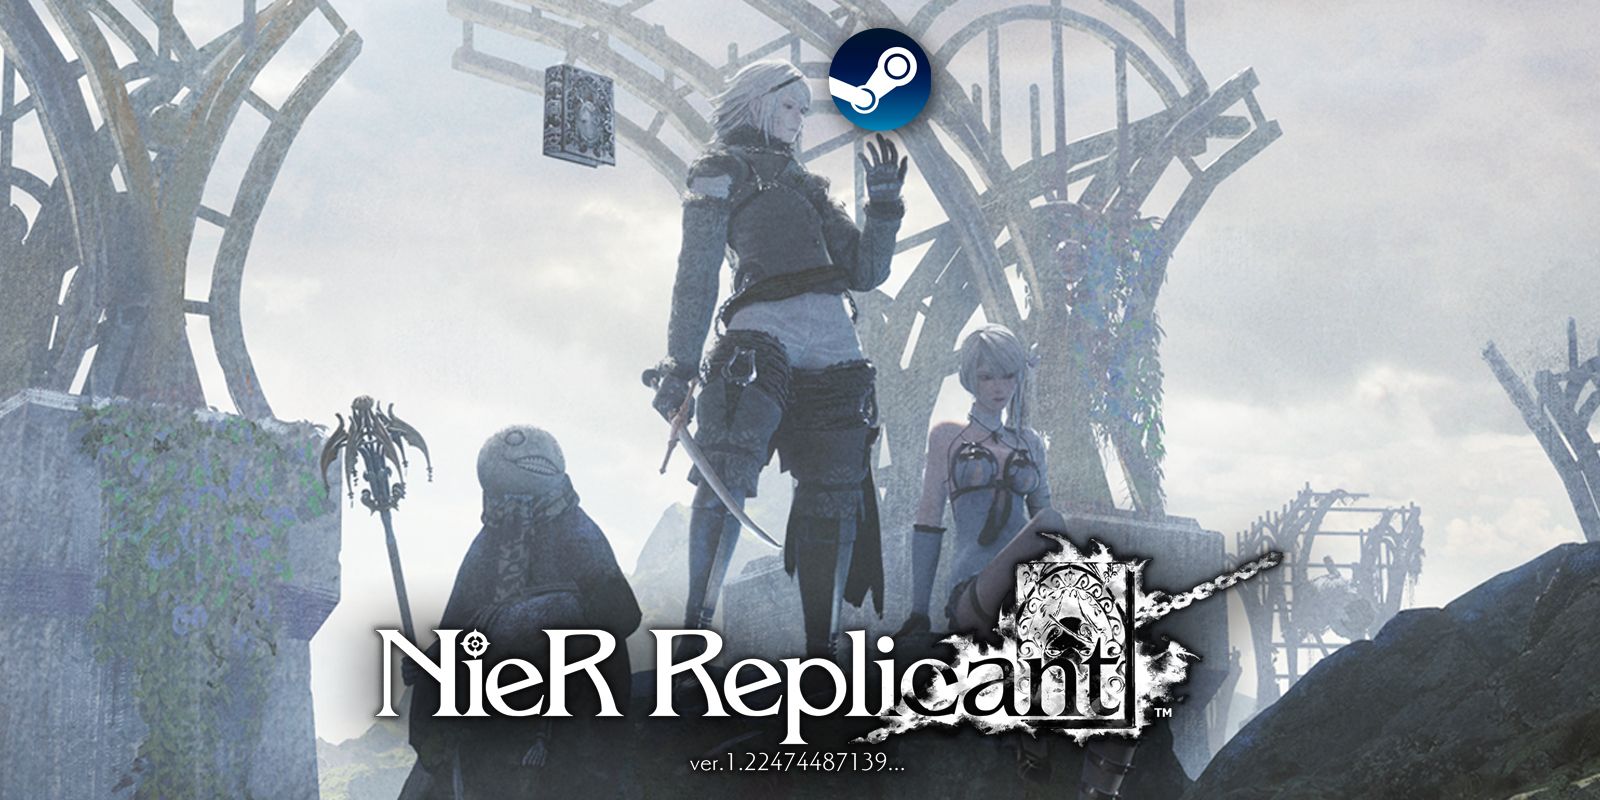 NieR Replicant Remaster Becomes Steam Bestseller